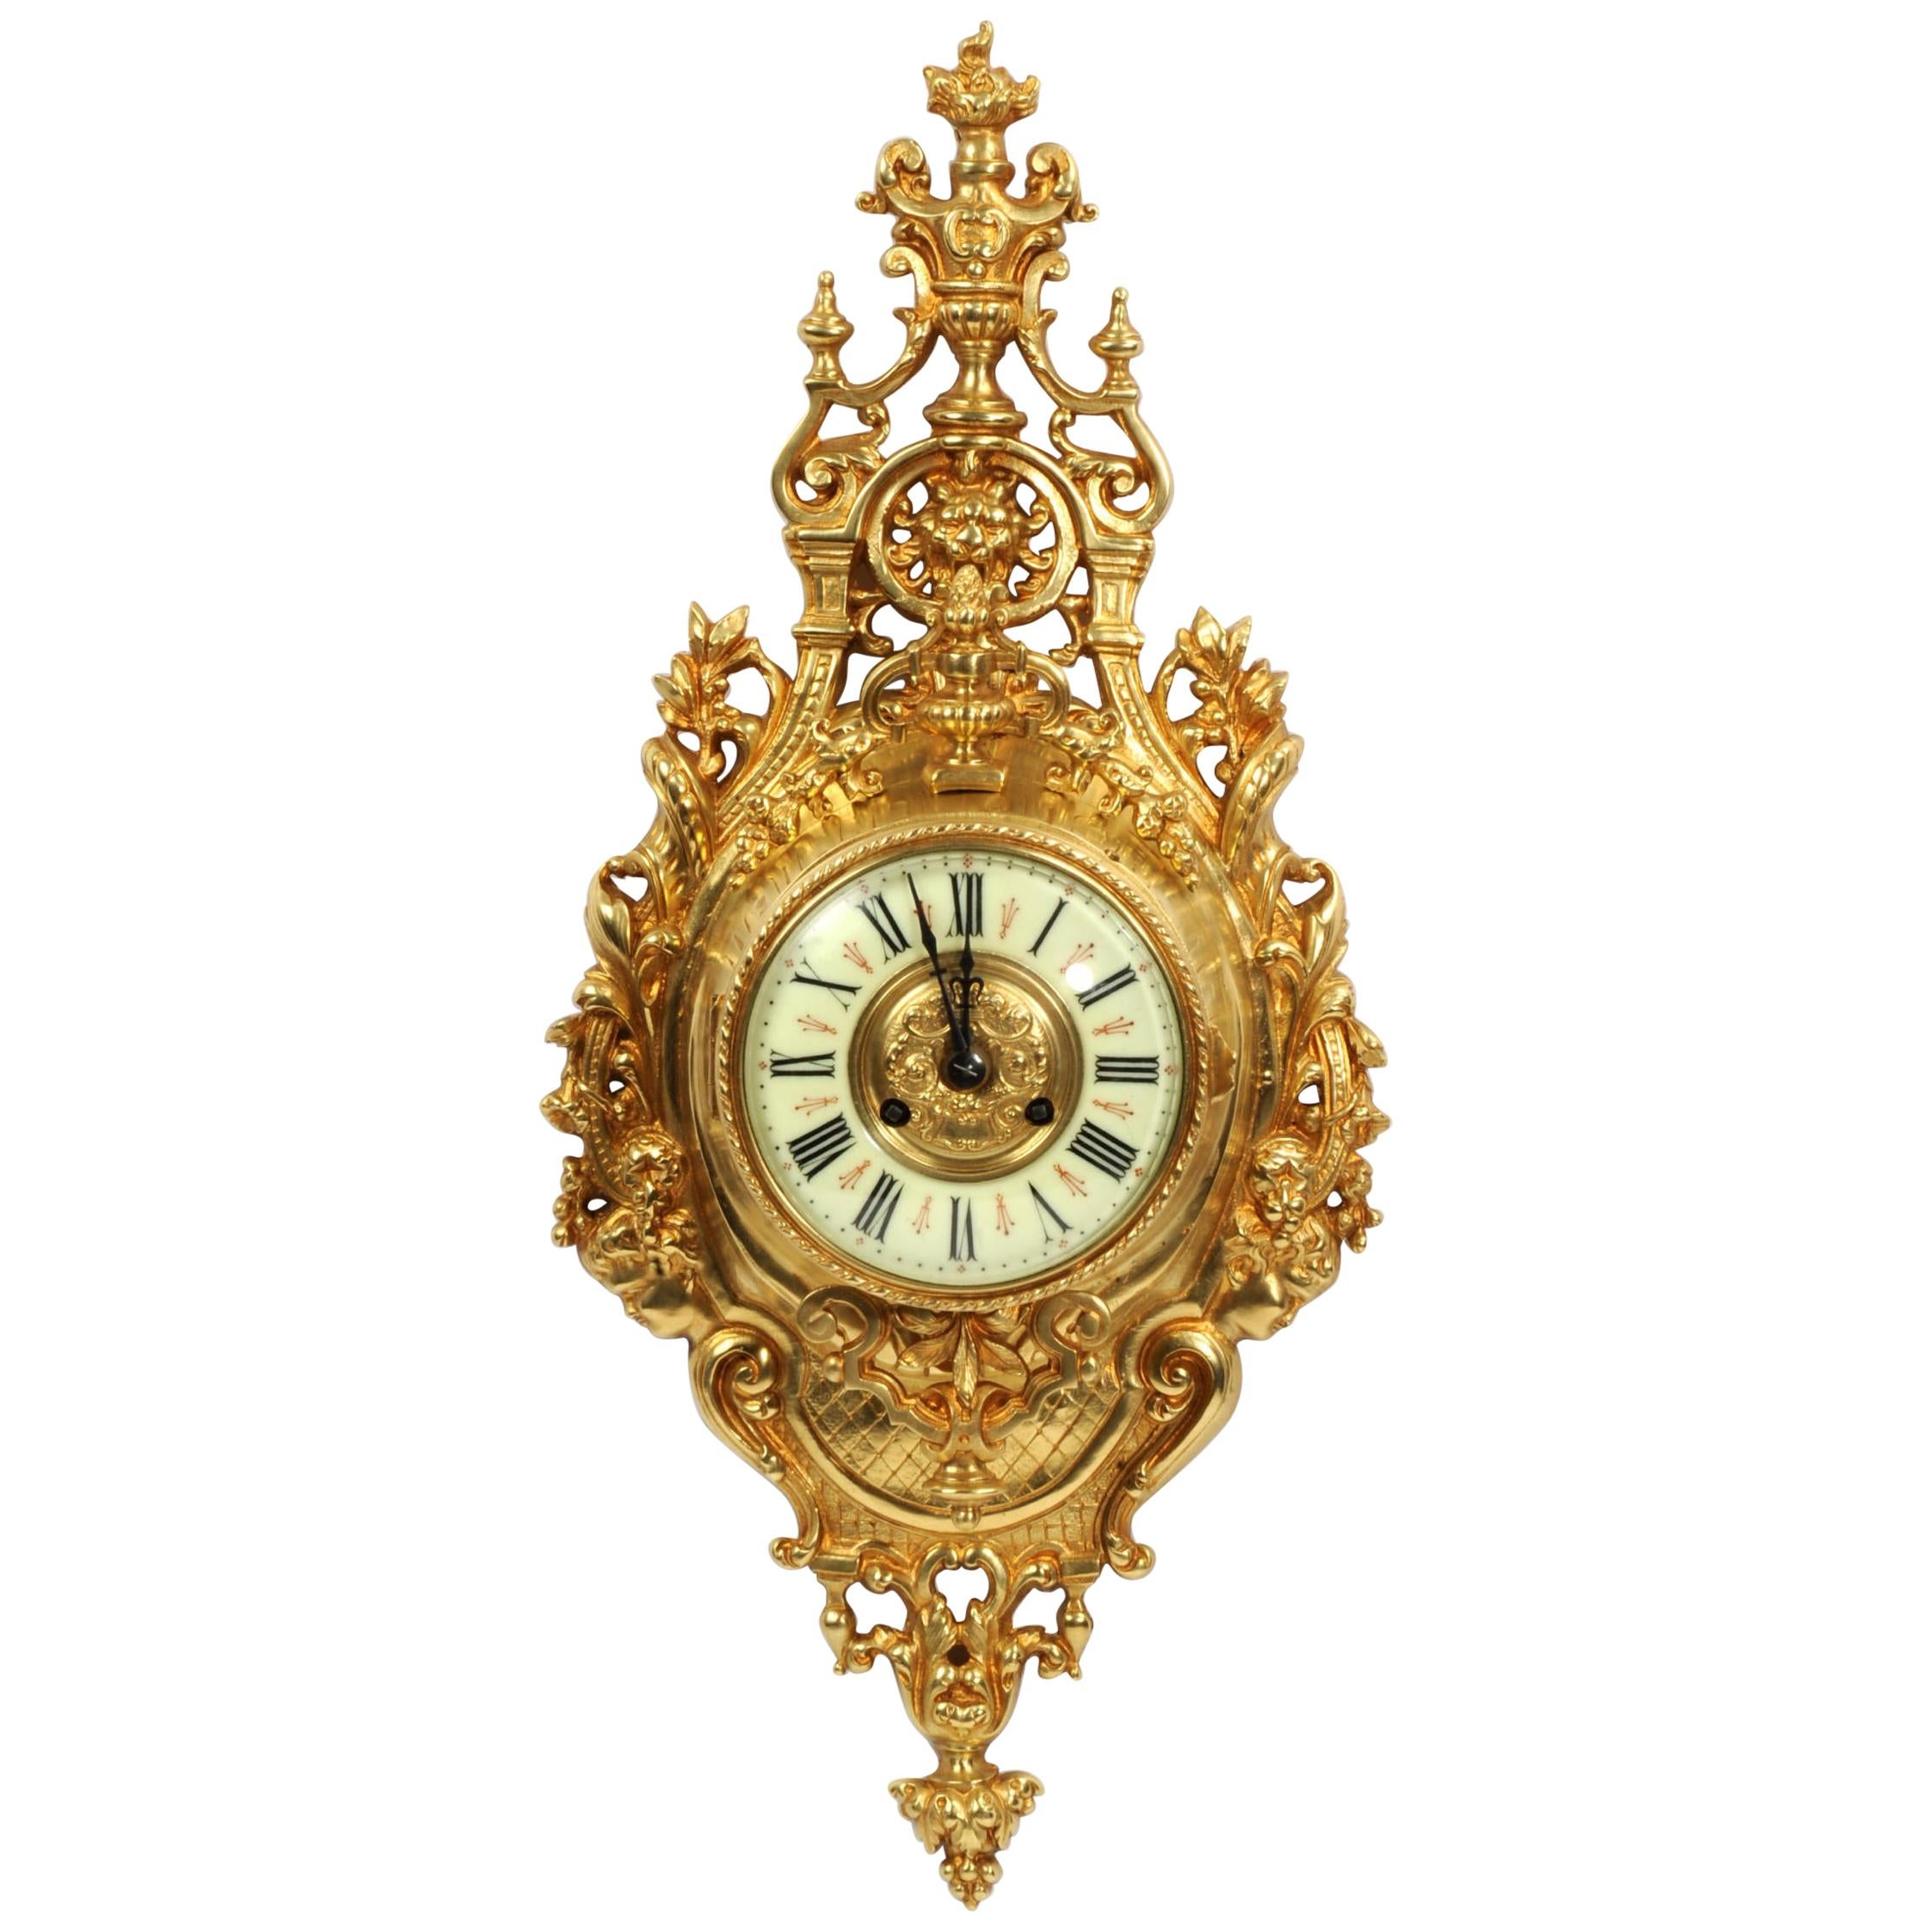 Antique French Gilt Bronze Baroque Cartel Wall Clock by Japy Freres